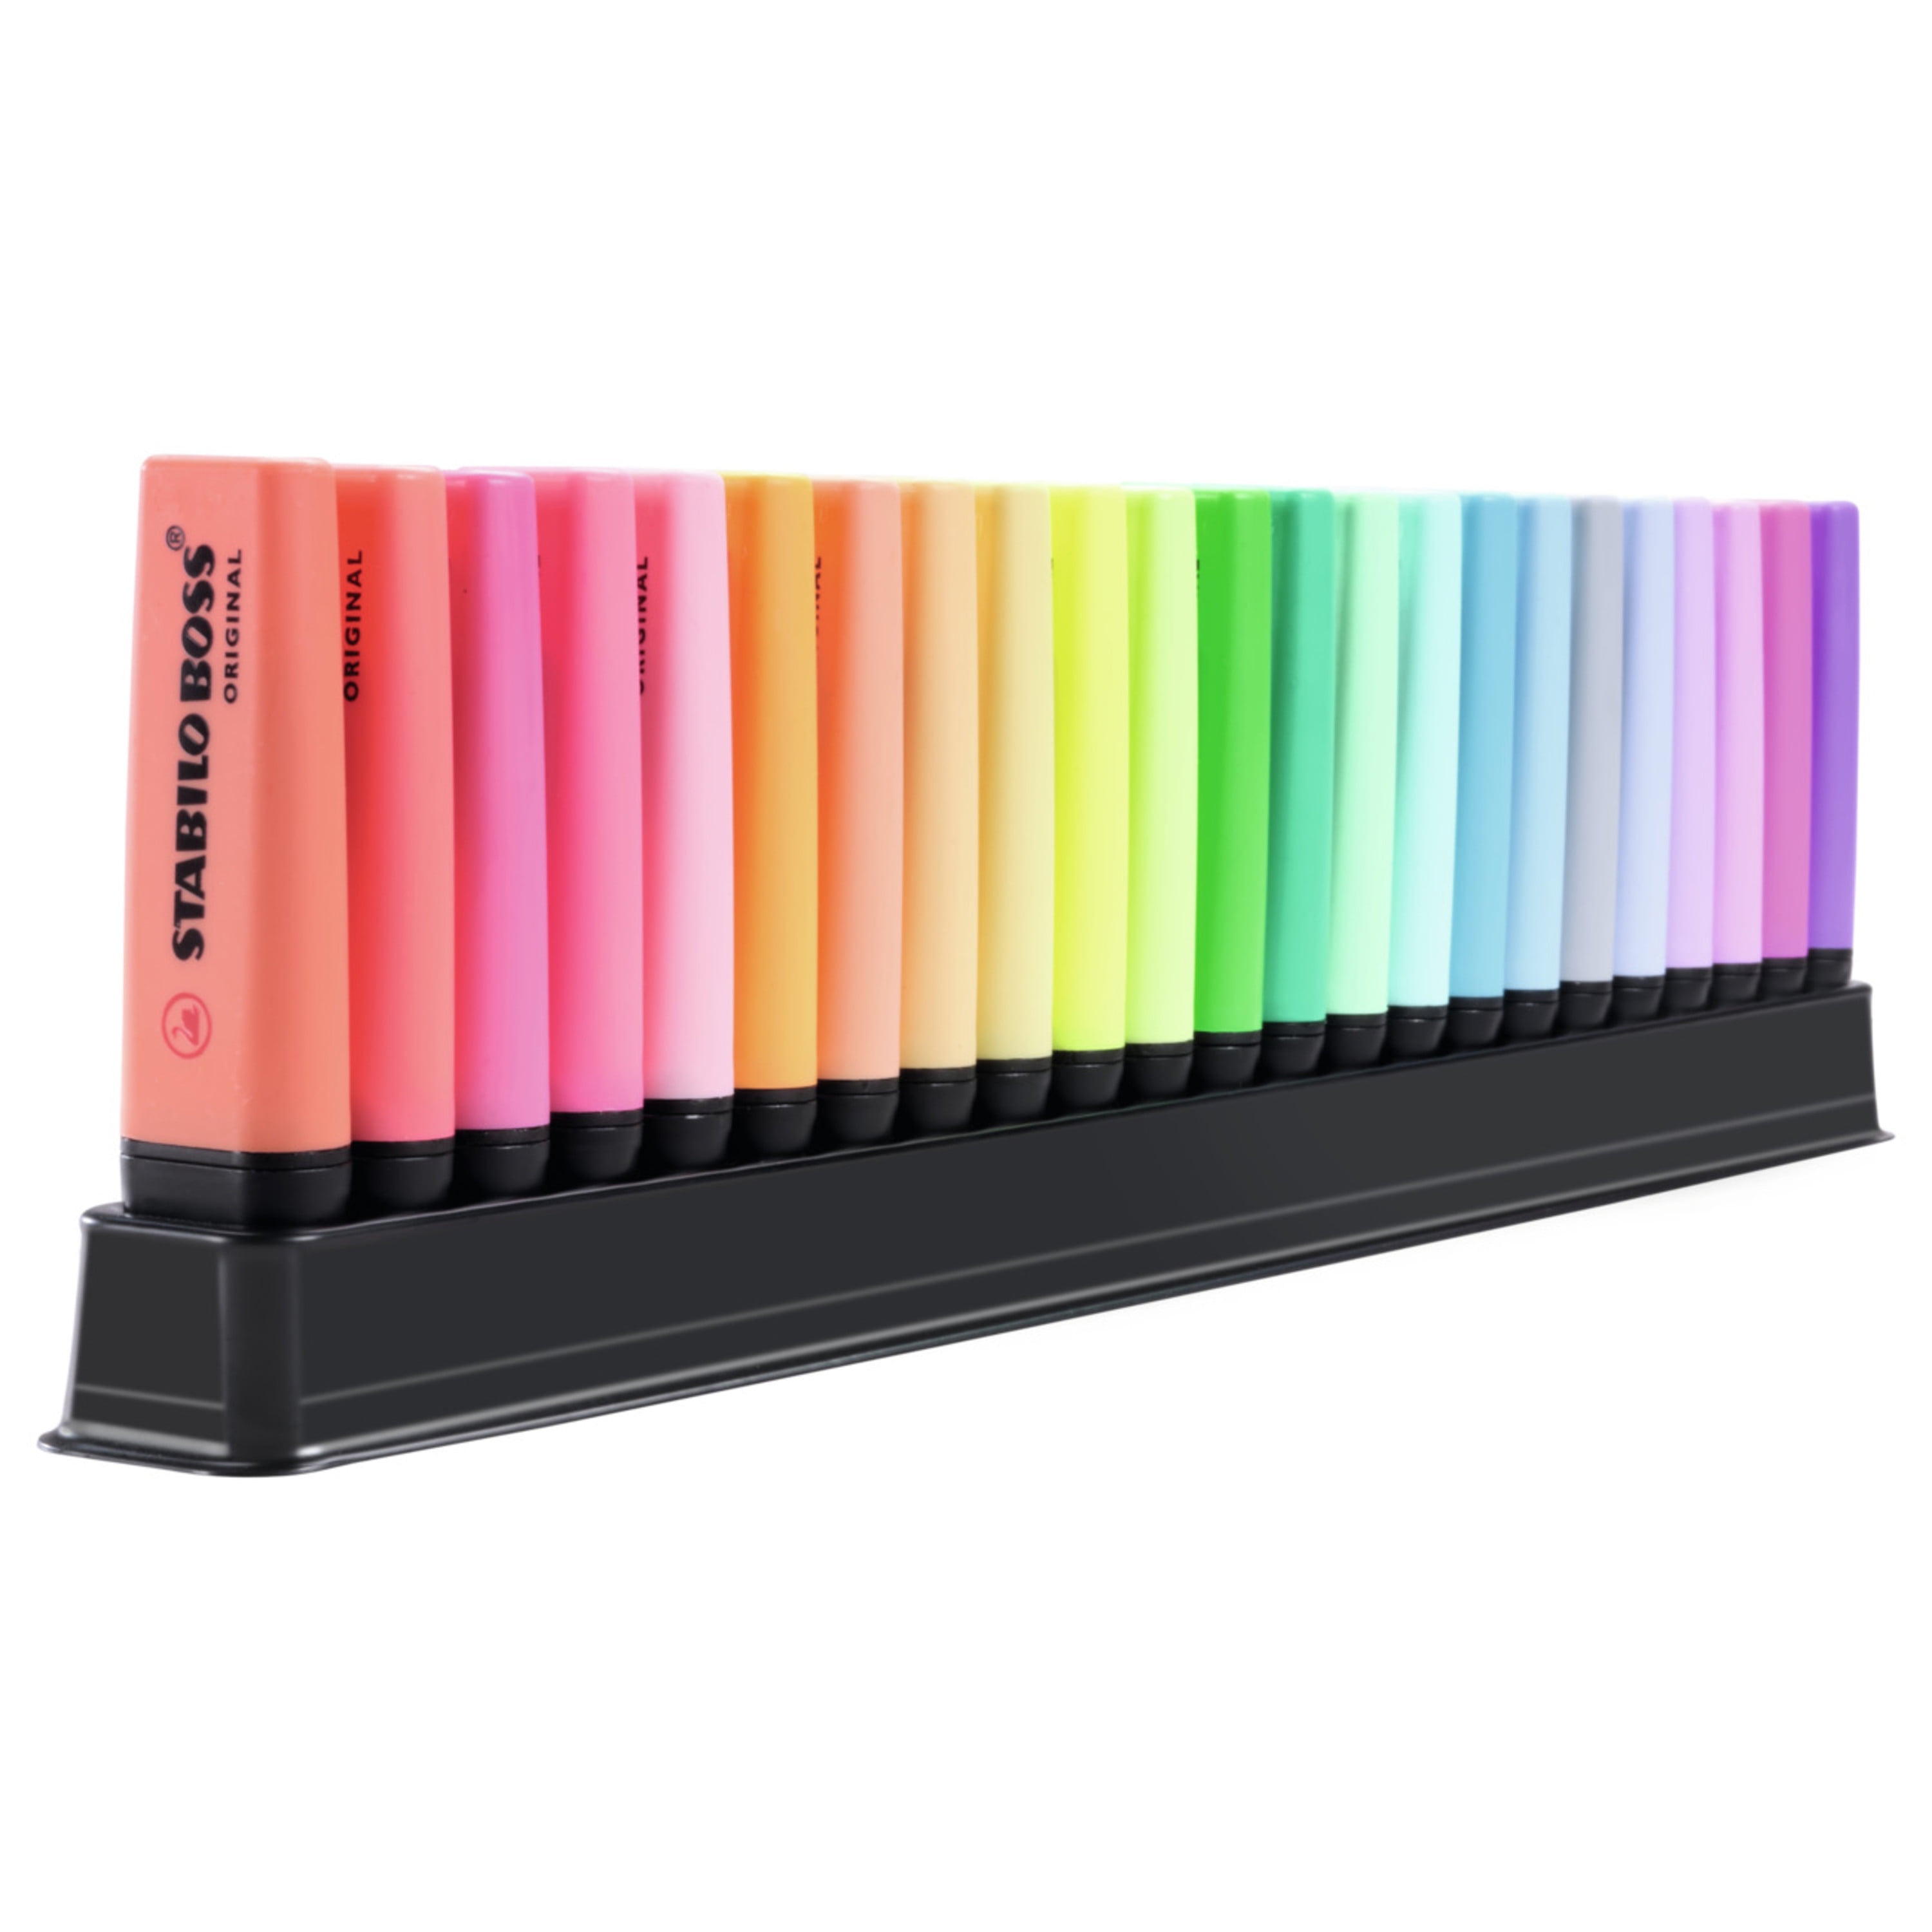 STABILO BOSS FLUOR 70/6-2 Marker Set - Variety of Brands such as Staedtler,  Scholl, Pilot, Bic and More - Estonia, New - The wholesale platform